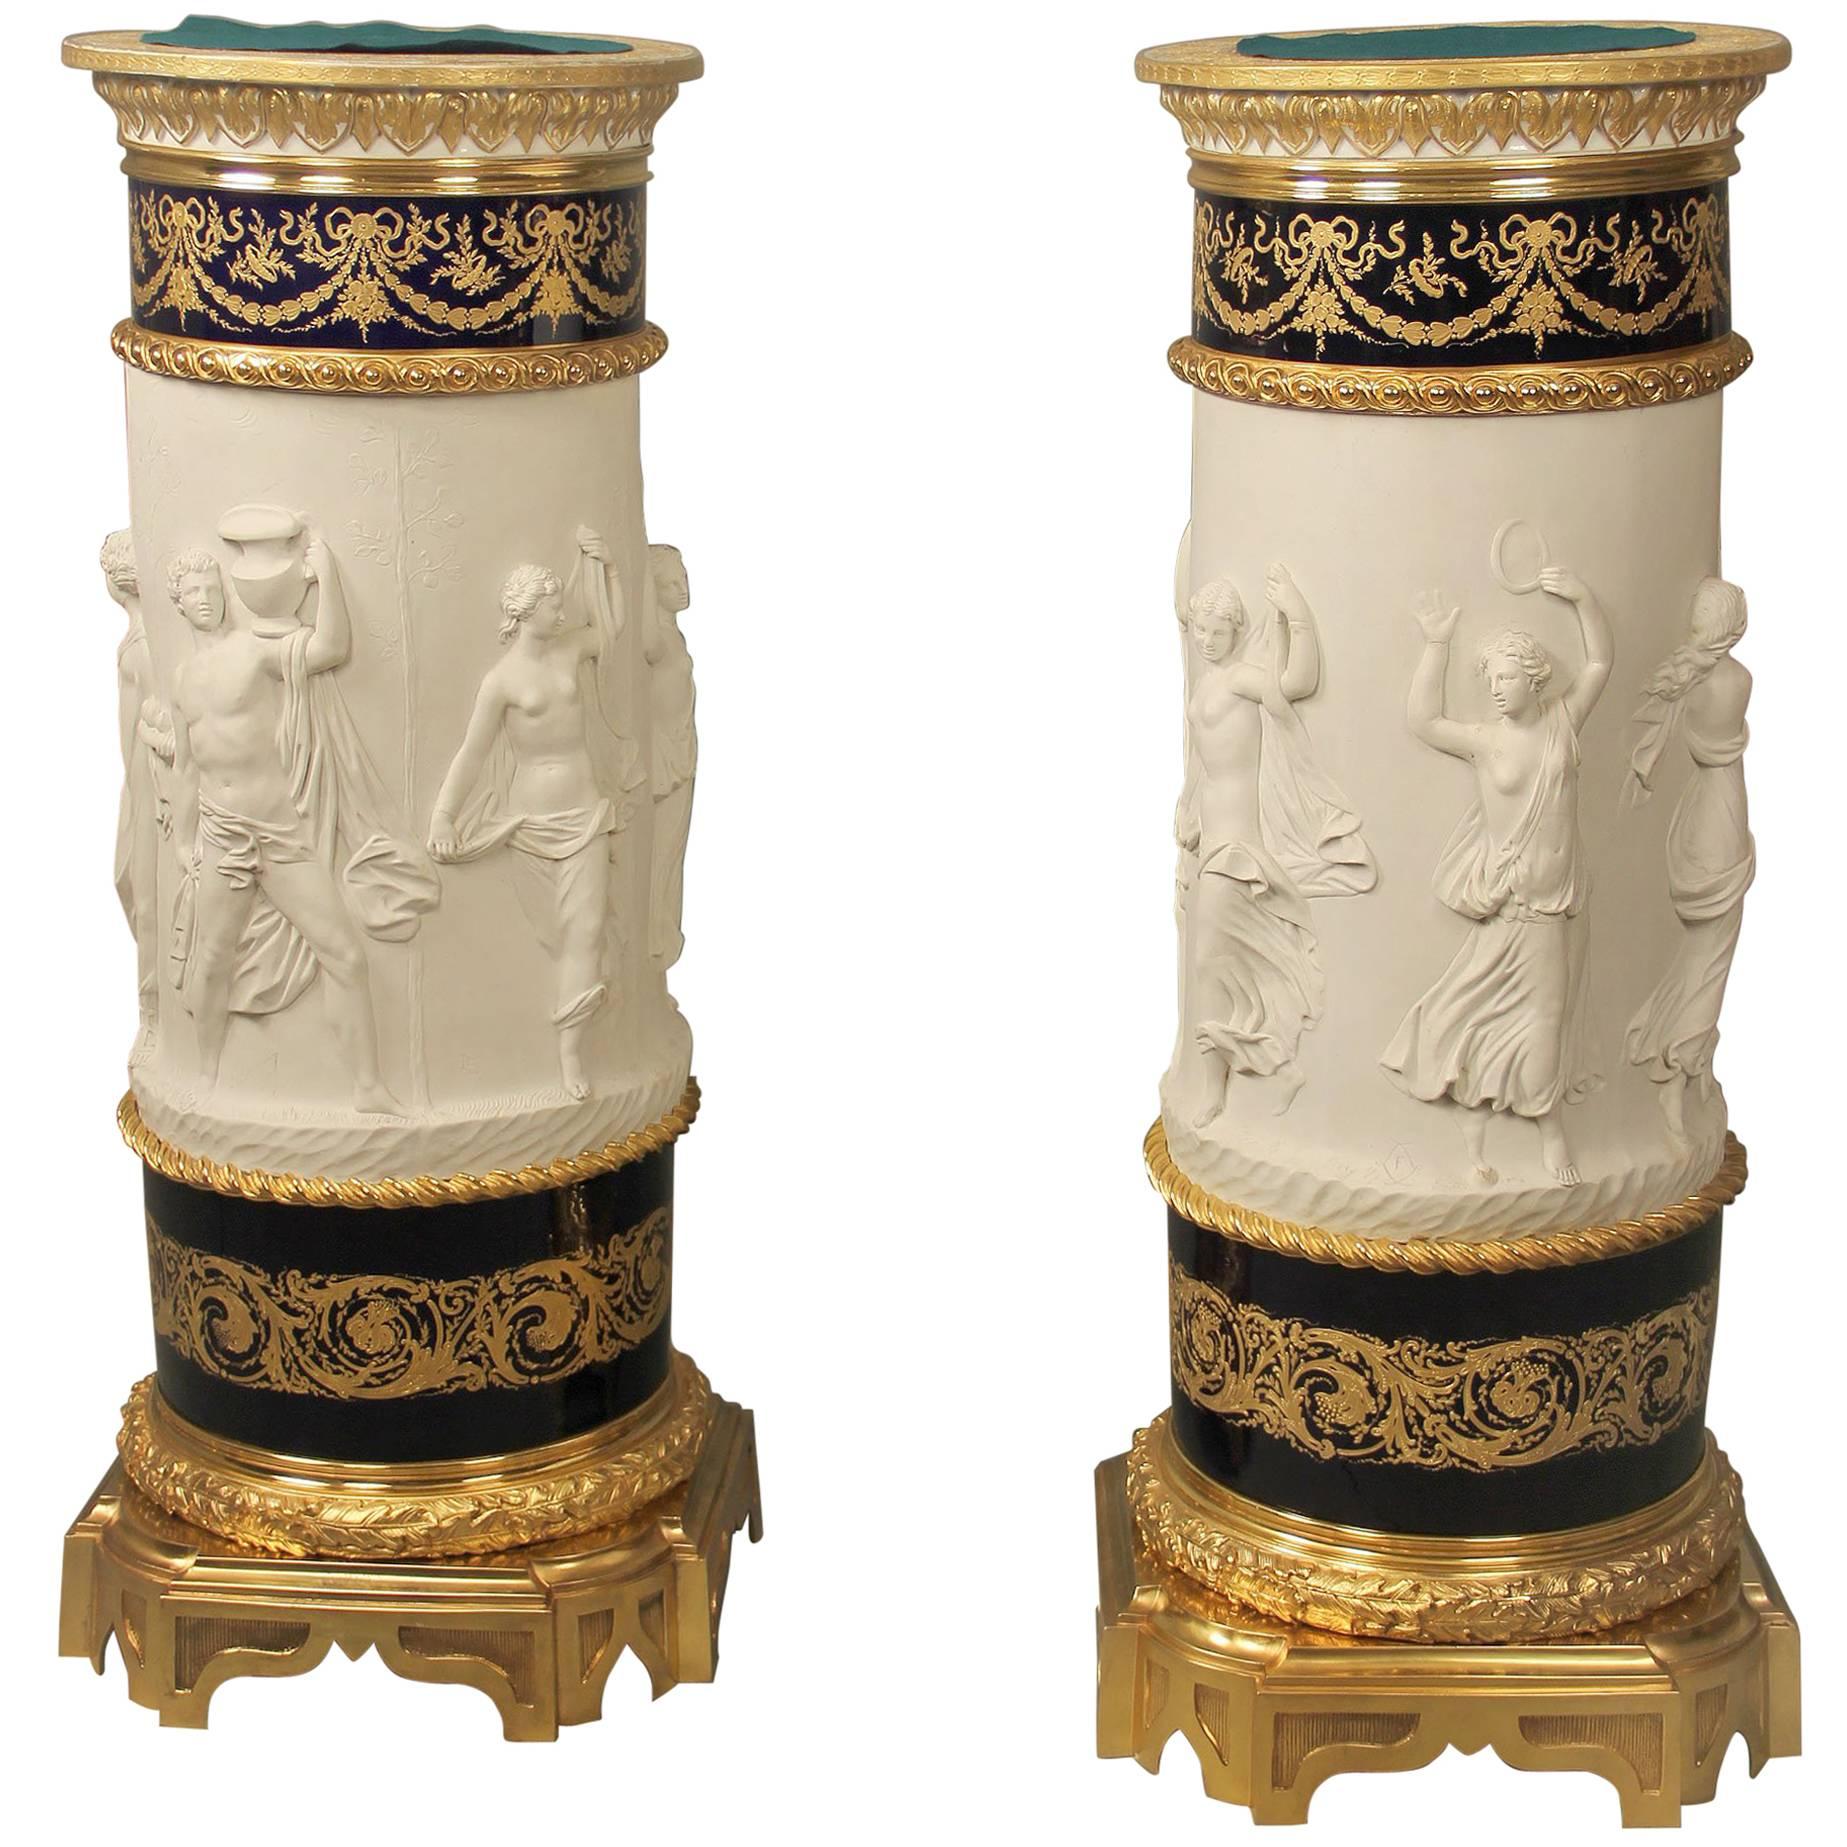 Pair of Late 19th Century Gilt Bronze-Mounted Sèvres Biscuit Porcelain Pedestals